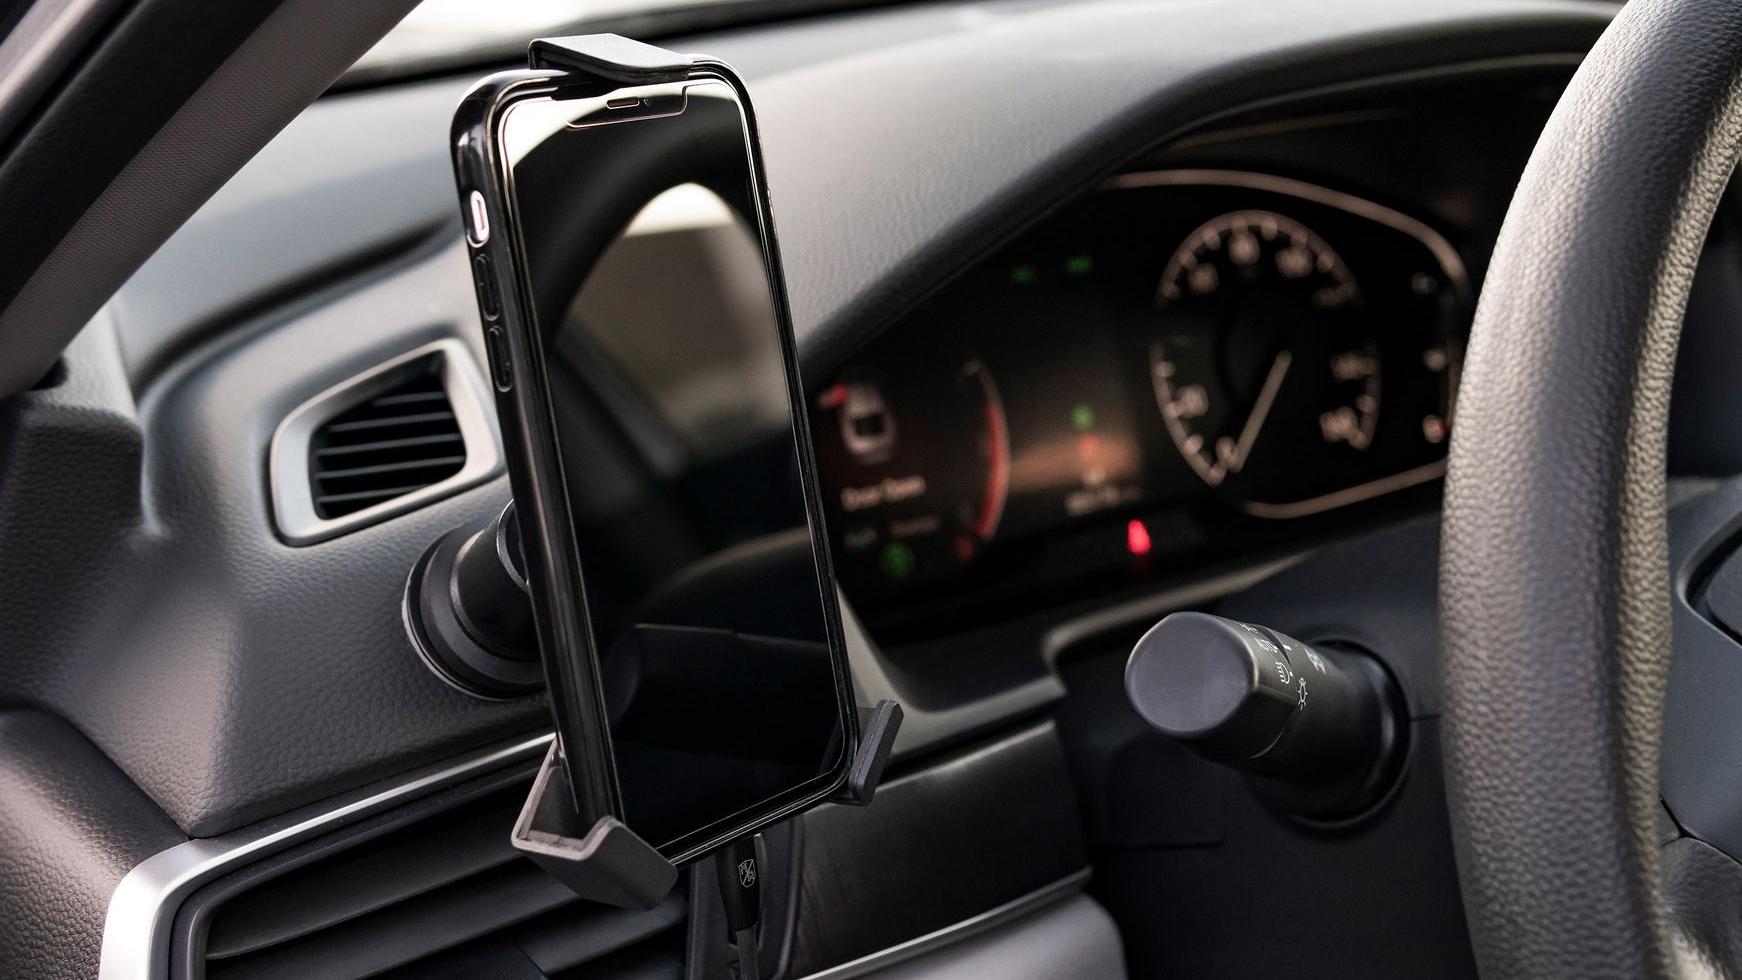 phone mounted to Mob Mount on car dashboard